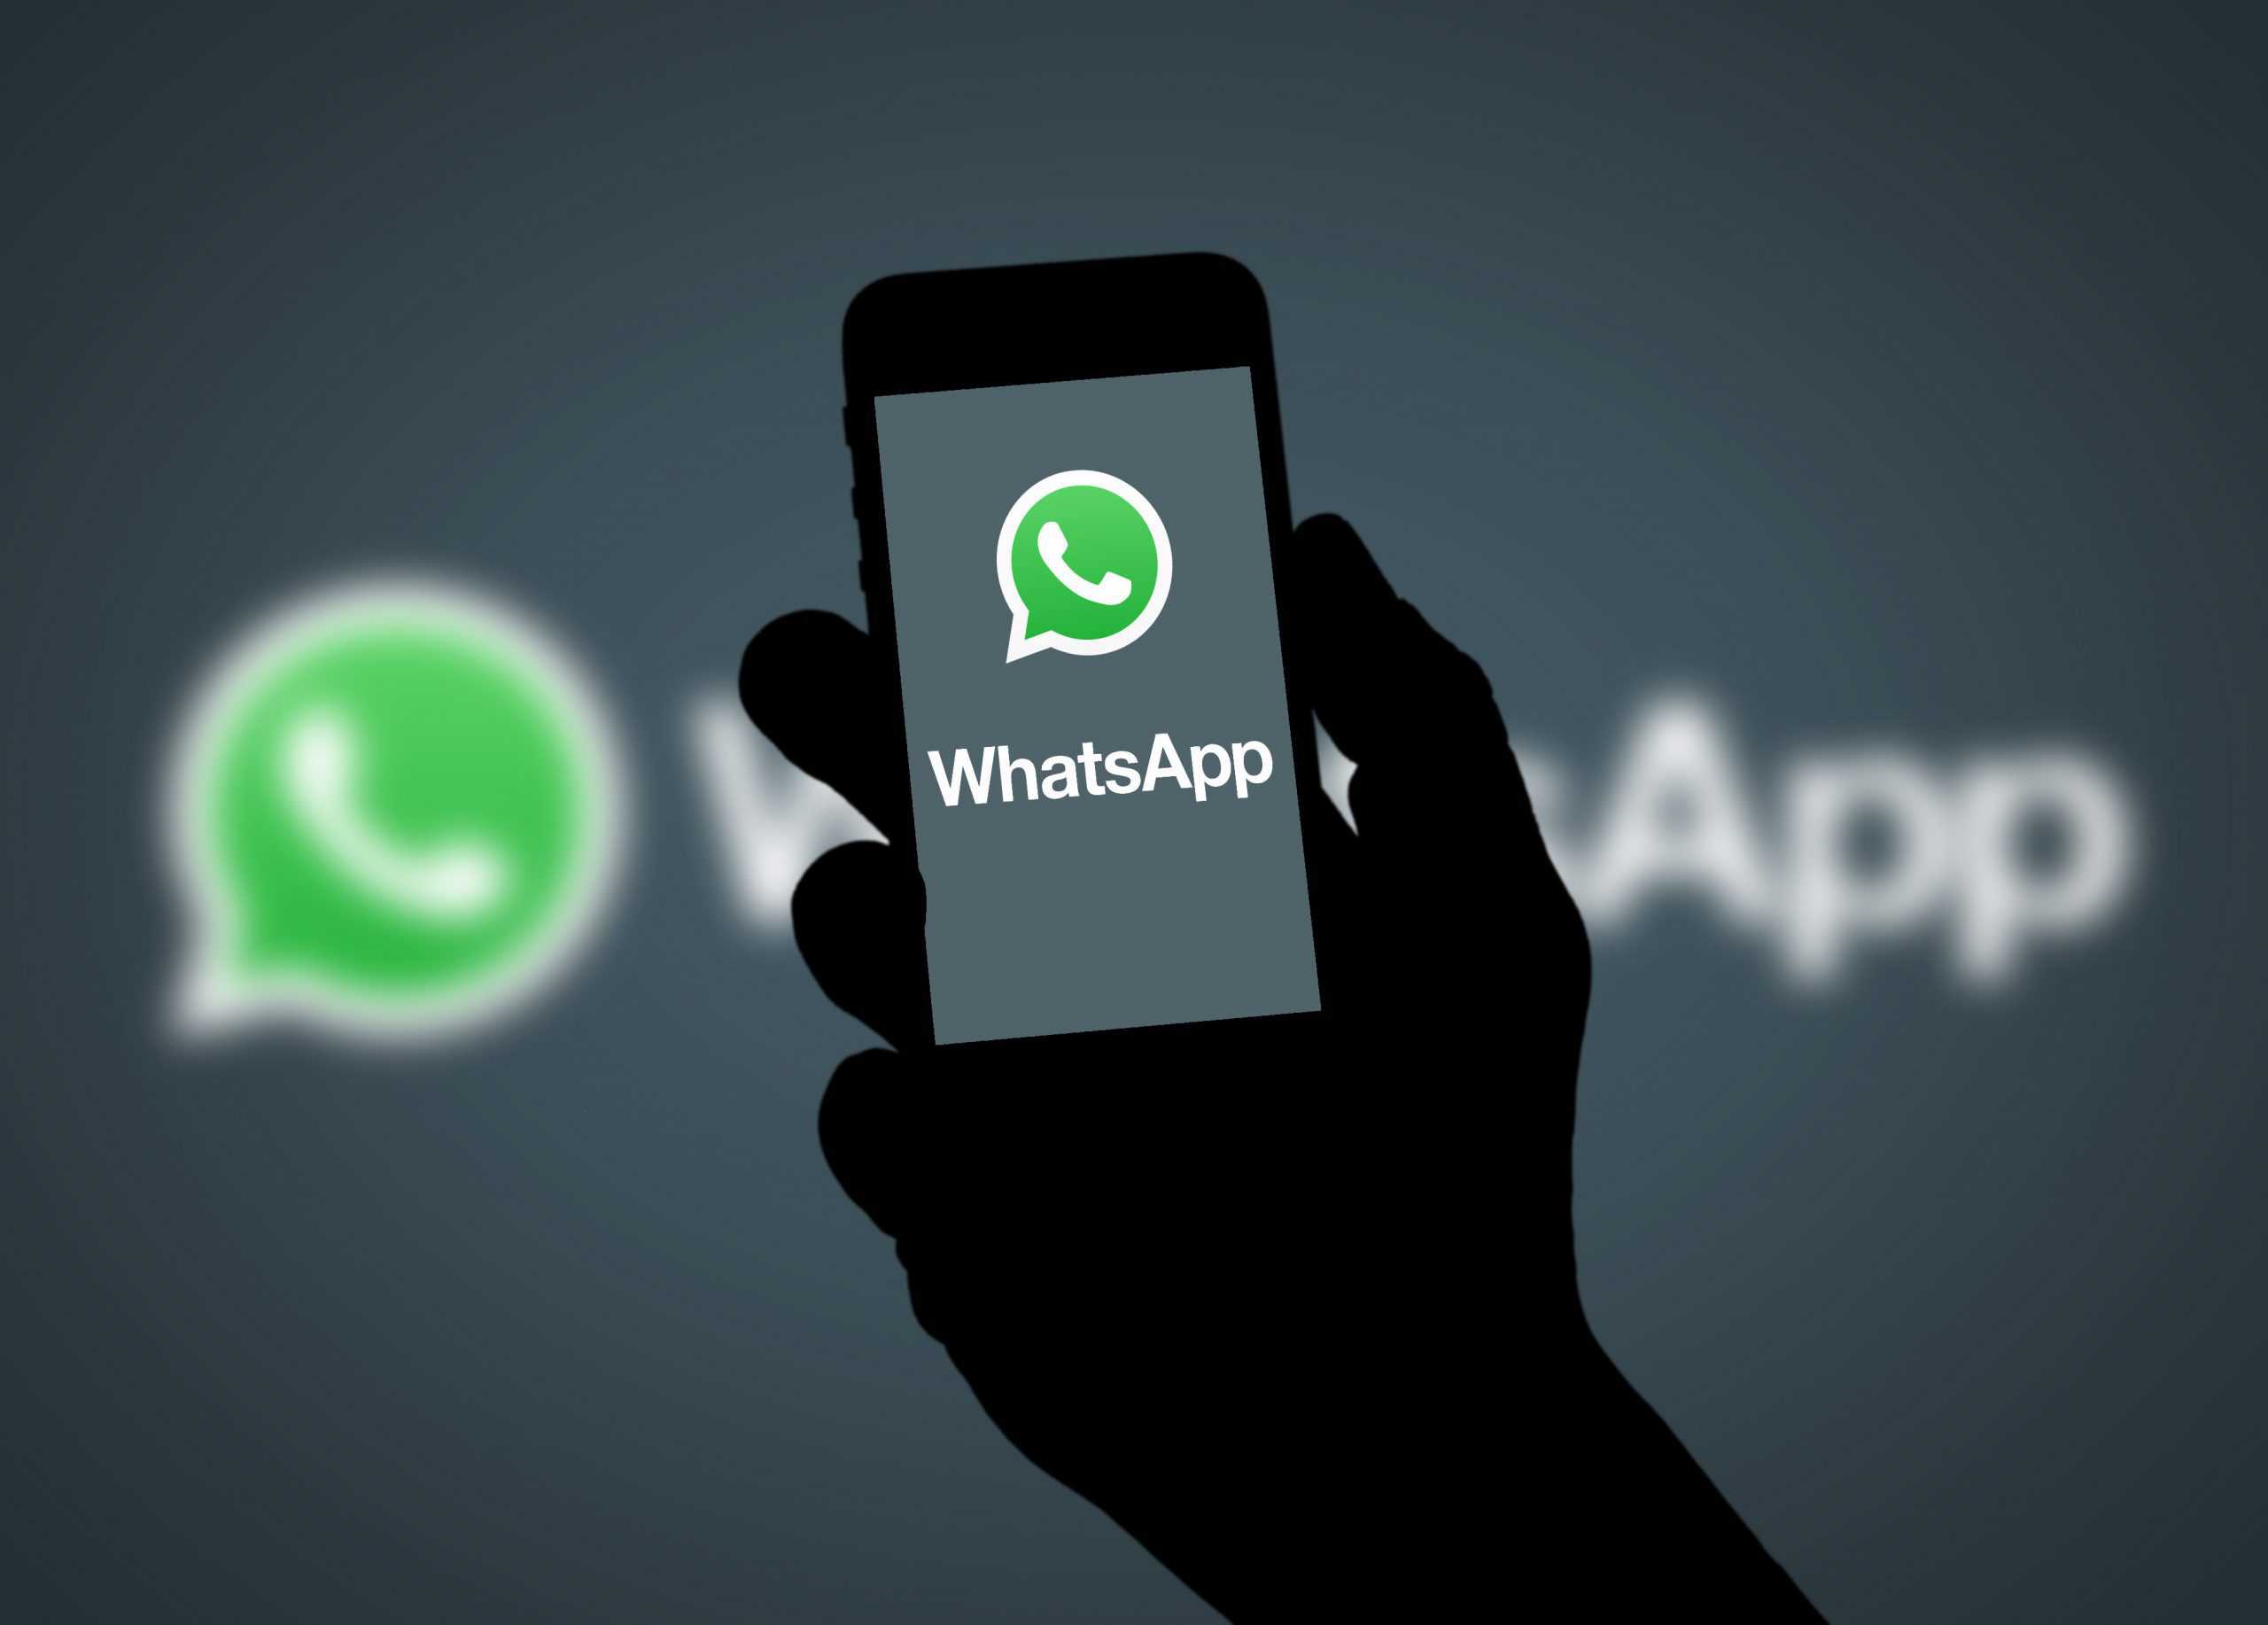 Whatsapp message reactions are rolling out